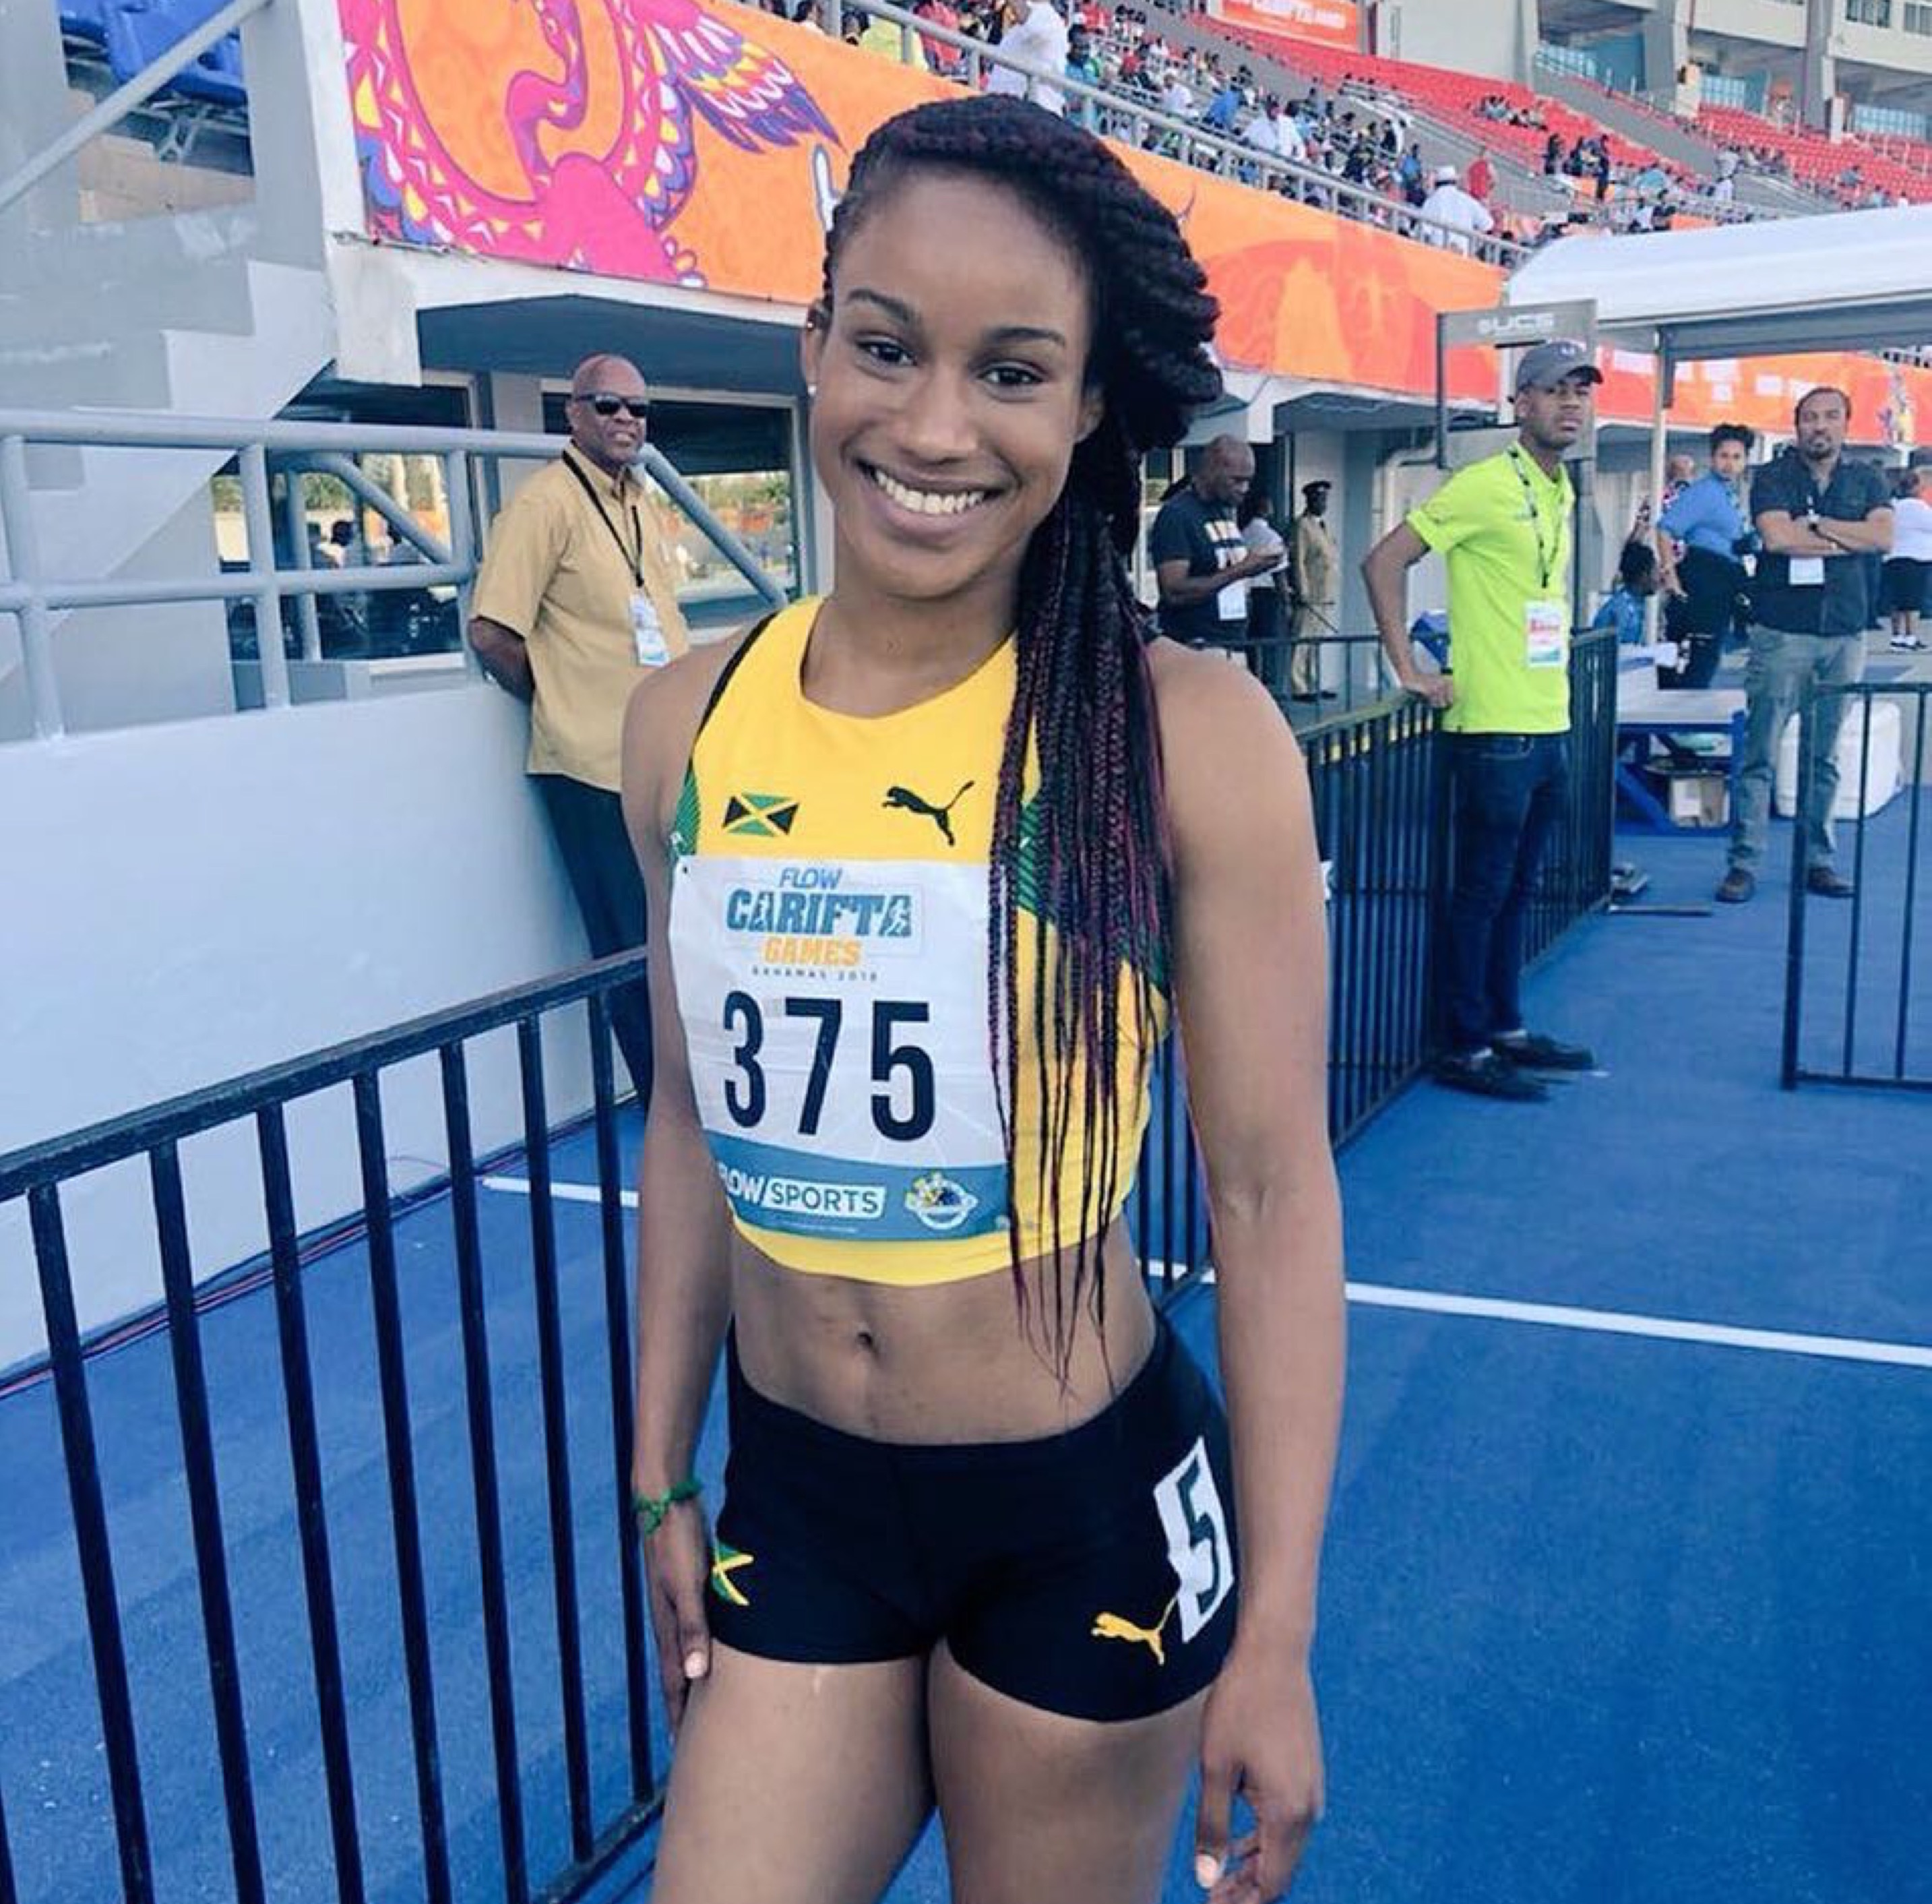 Mixed results for Briana Williams in Florida speed test